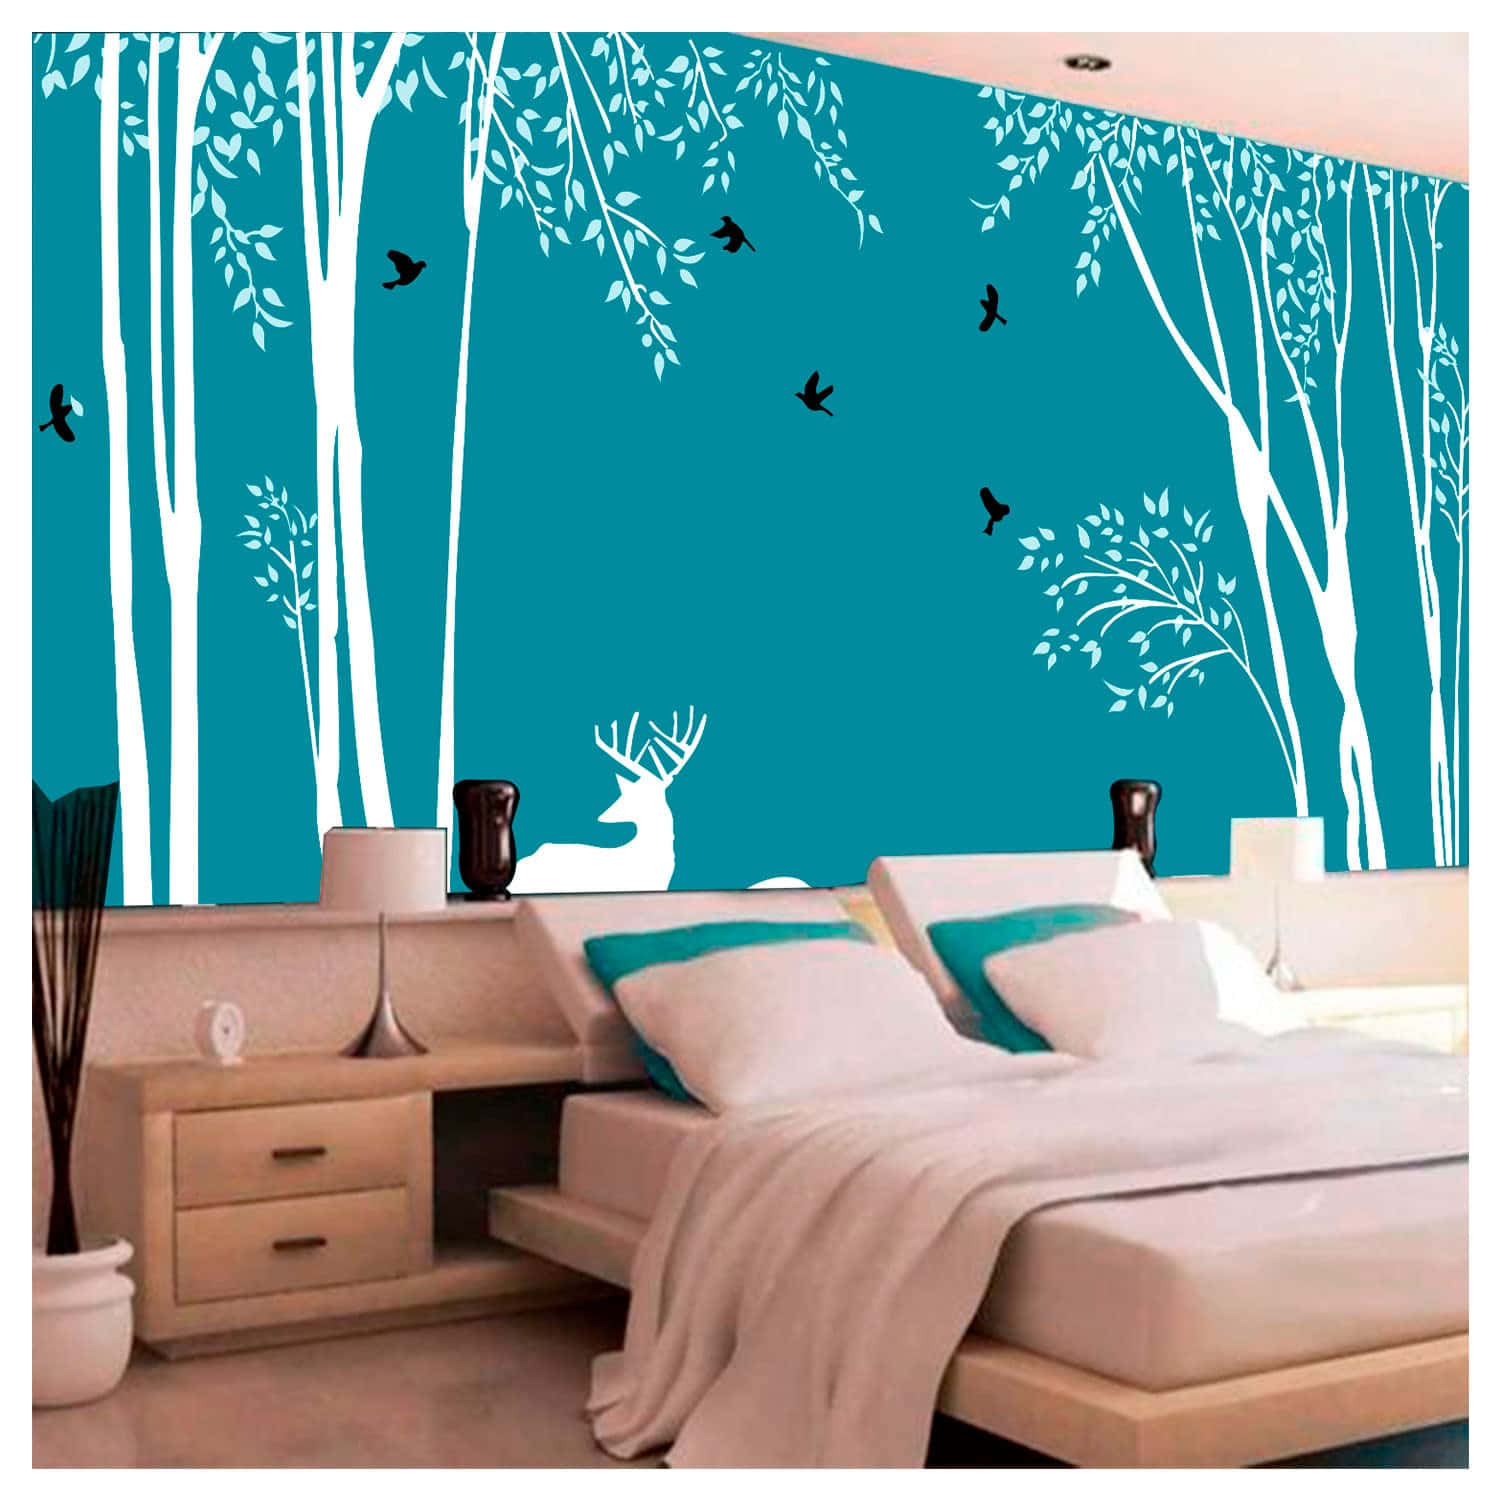 A Bedroom With A Deer And Trees On The Wall